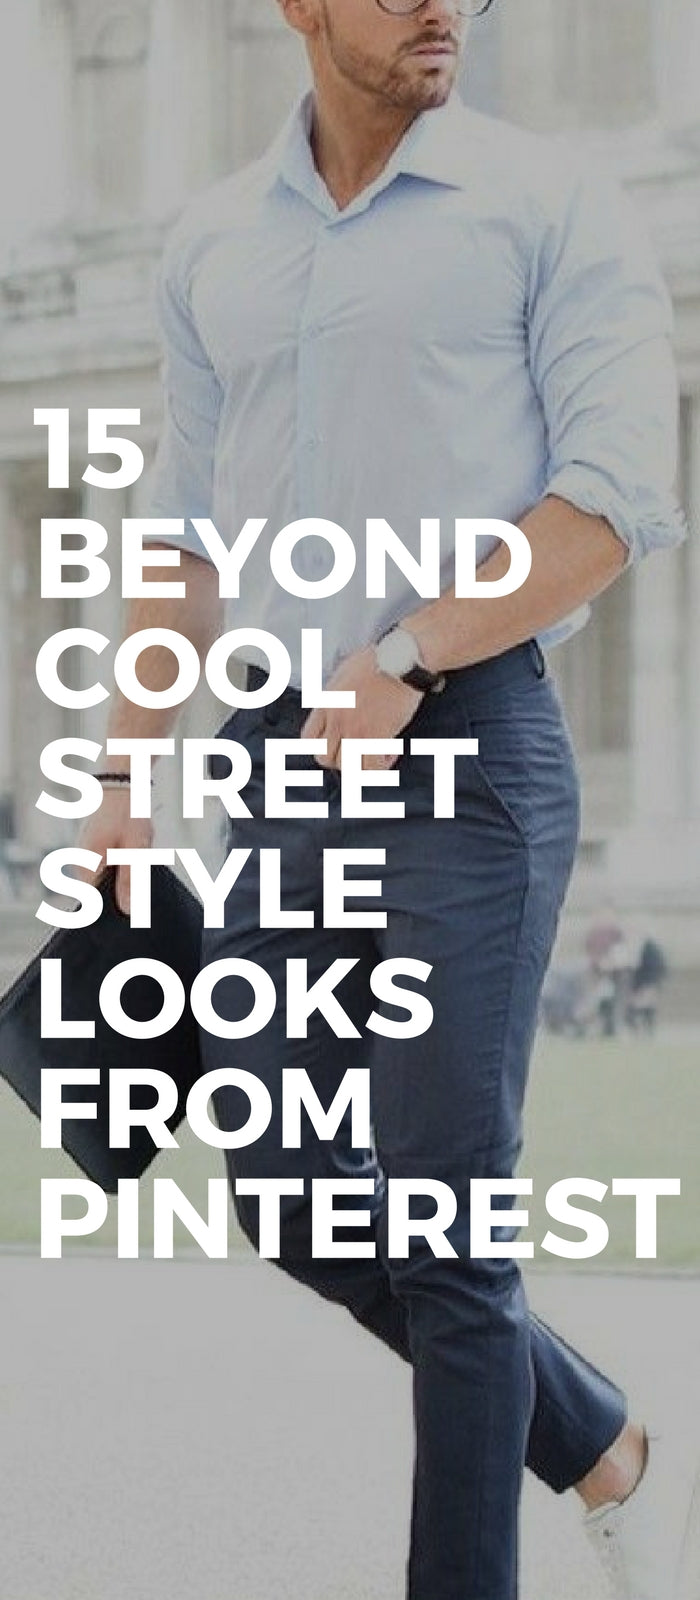 15 Beyond Cool Street Style Looks From Pinterest